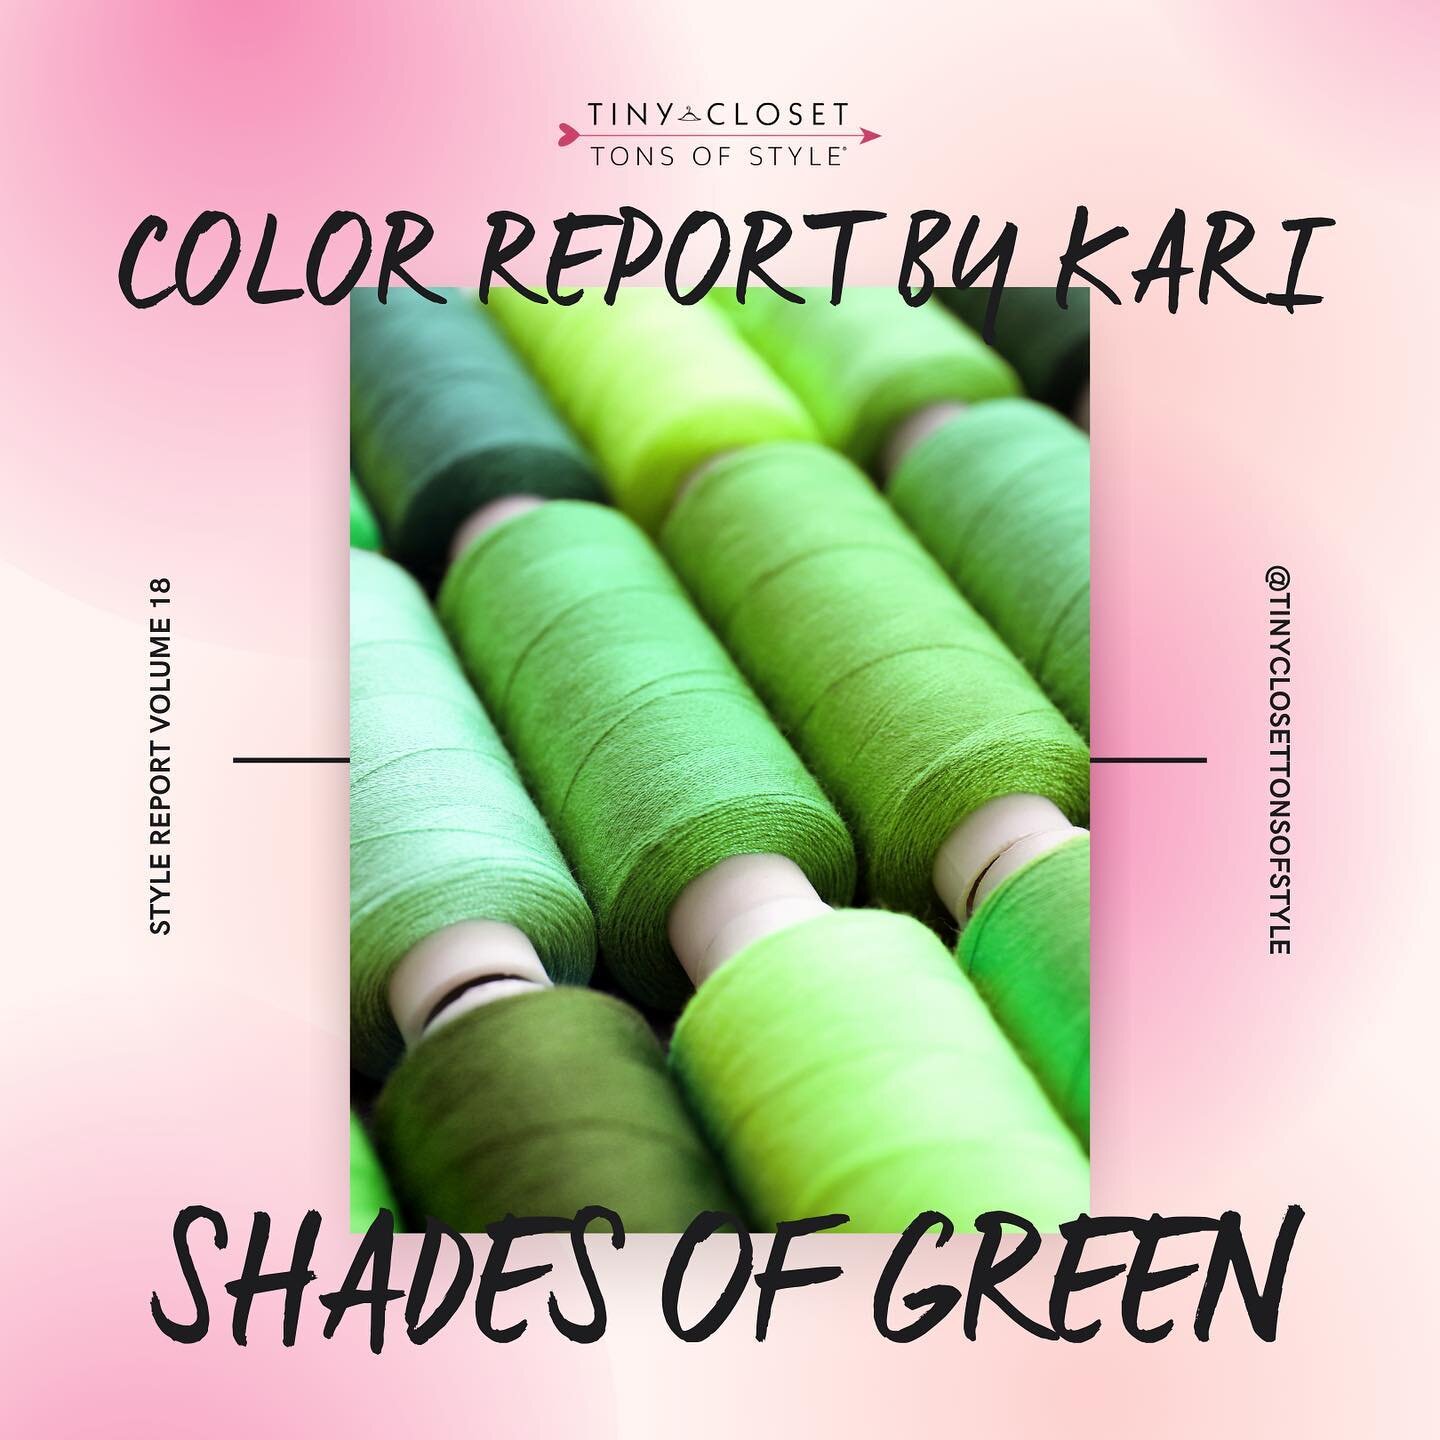 Happy Saint Patrick's Day Ladies! Who's wearing green? Green can be a challenging color to wear. Many of us would rather get pinched than wear green. The secret is in the shade. 

SHOP SHADES OF GREEN-&gt; link in bio

Luckily, I have called in the c